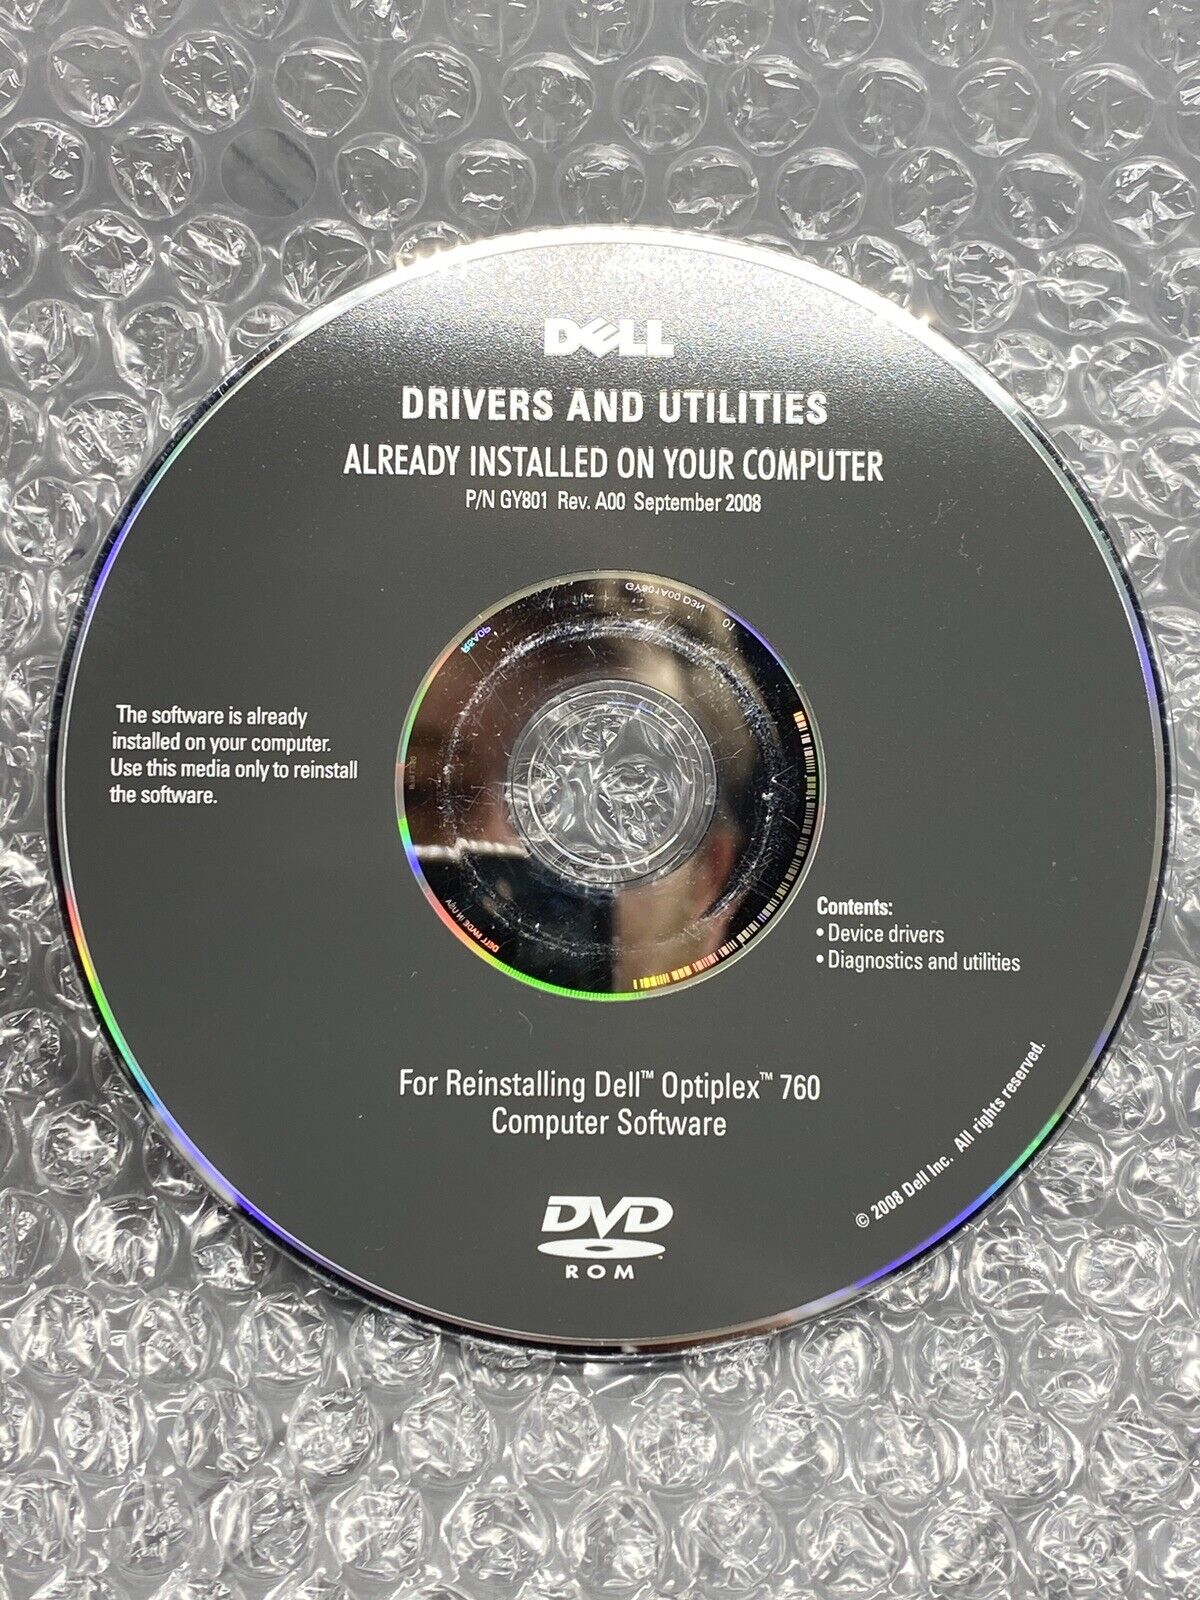 Dell Drivers And Utilities CD for Dell Optiplex 760